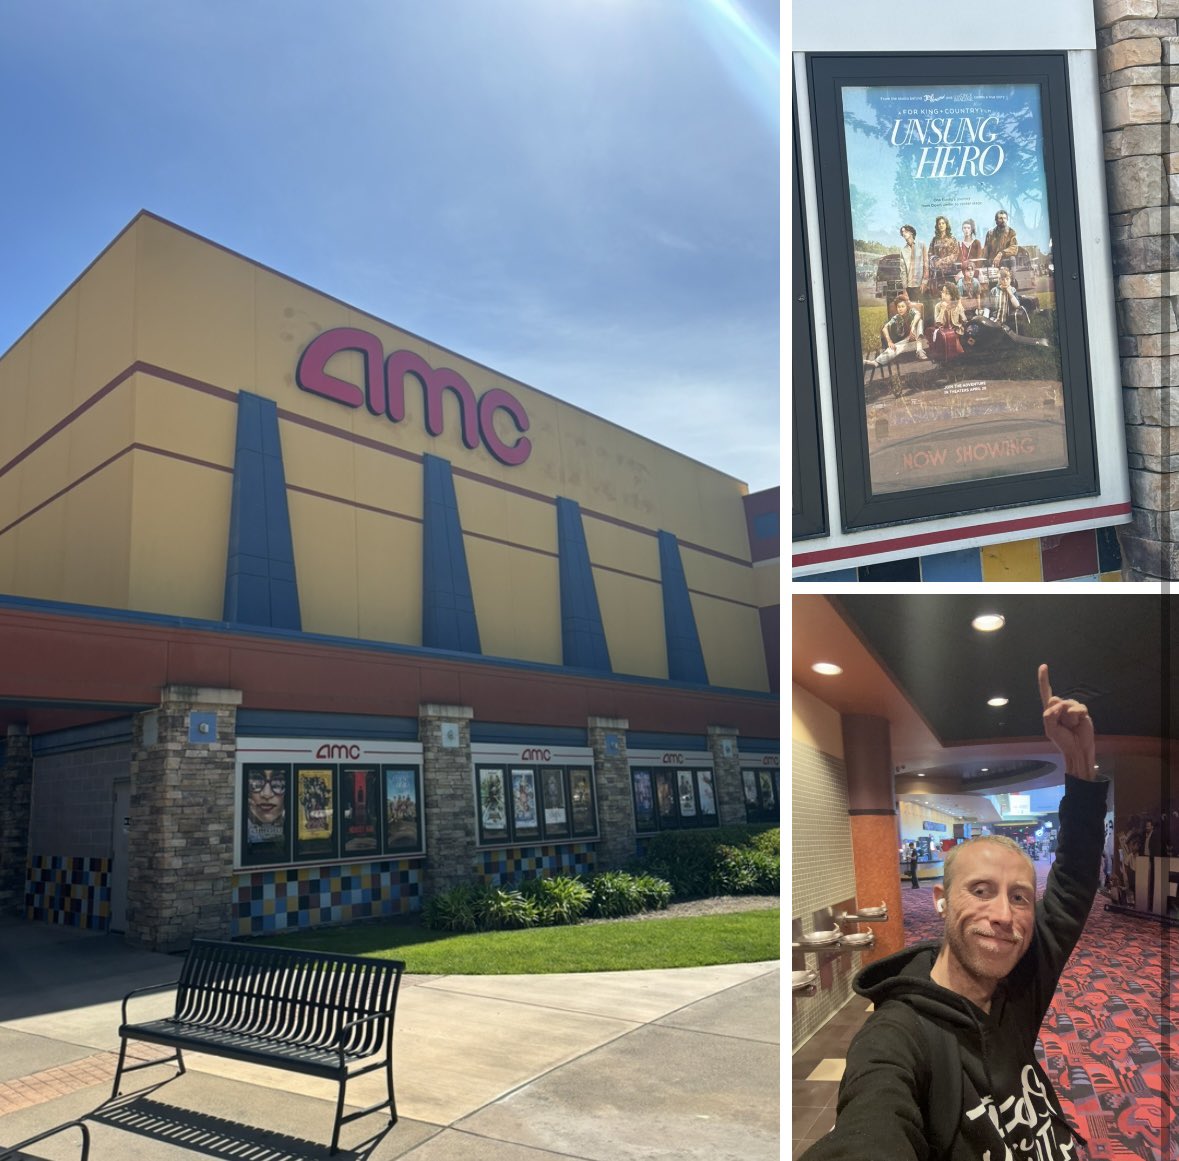 I’m Ready For @unsungheromovie At Manteca California @AMCTheatres At 4pm Today ☺️❤️ ☝🏻

@KelseyGrammer  @prayerdude @greglaurie @CatheLaurie  @Joel_Courtney @therealagbarlow  @harvestriv  @JonathanRoumie  @NYMag @nypostsports @GilpinPeri @kevinddaniels @MitchPoulos